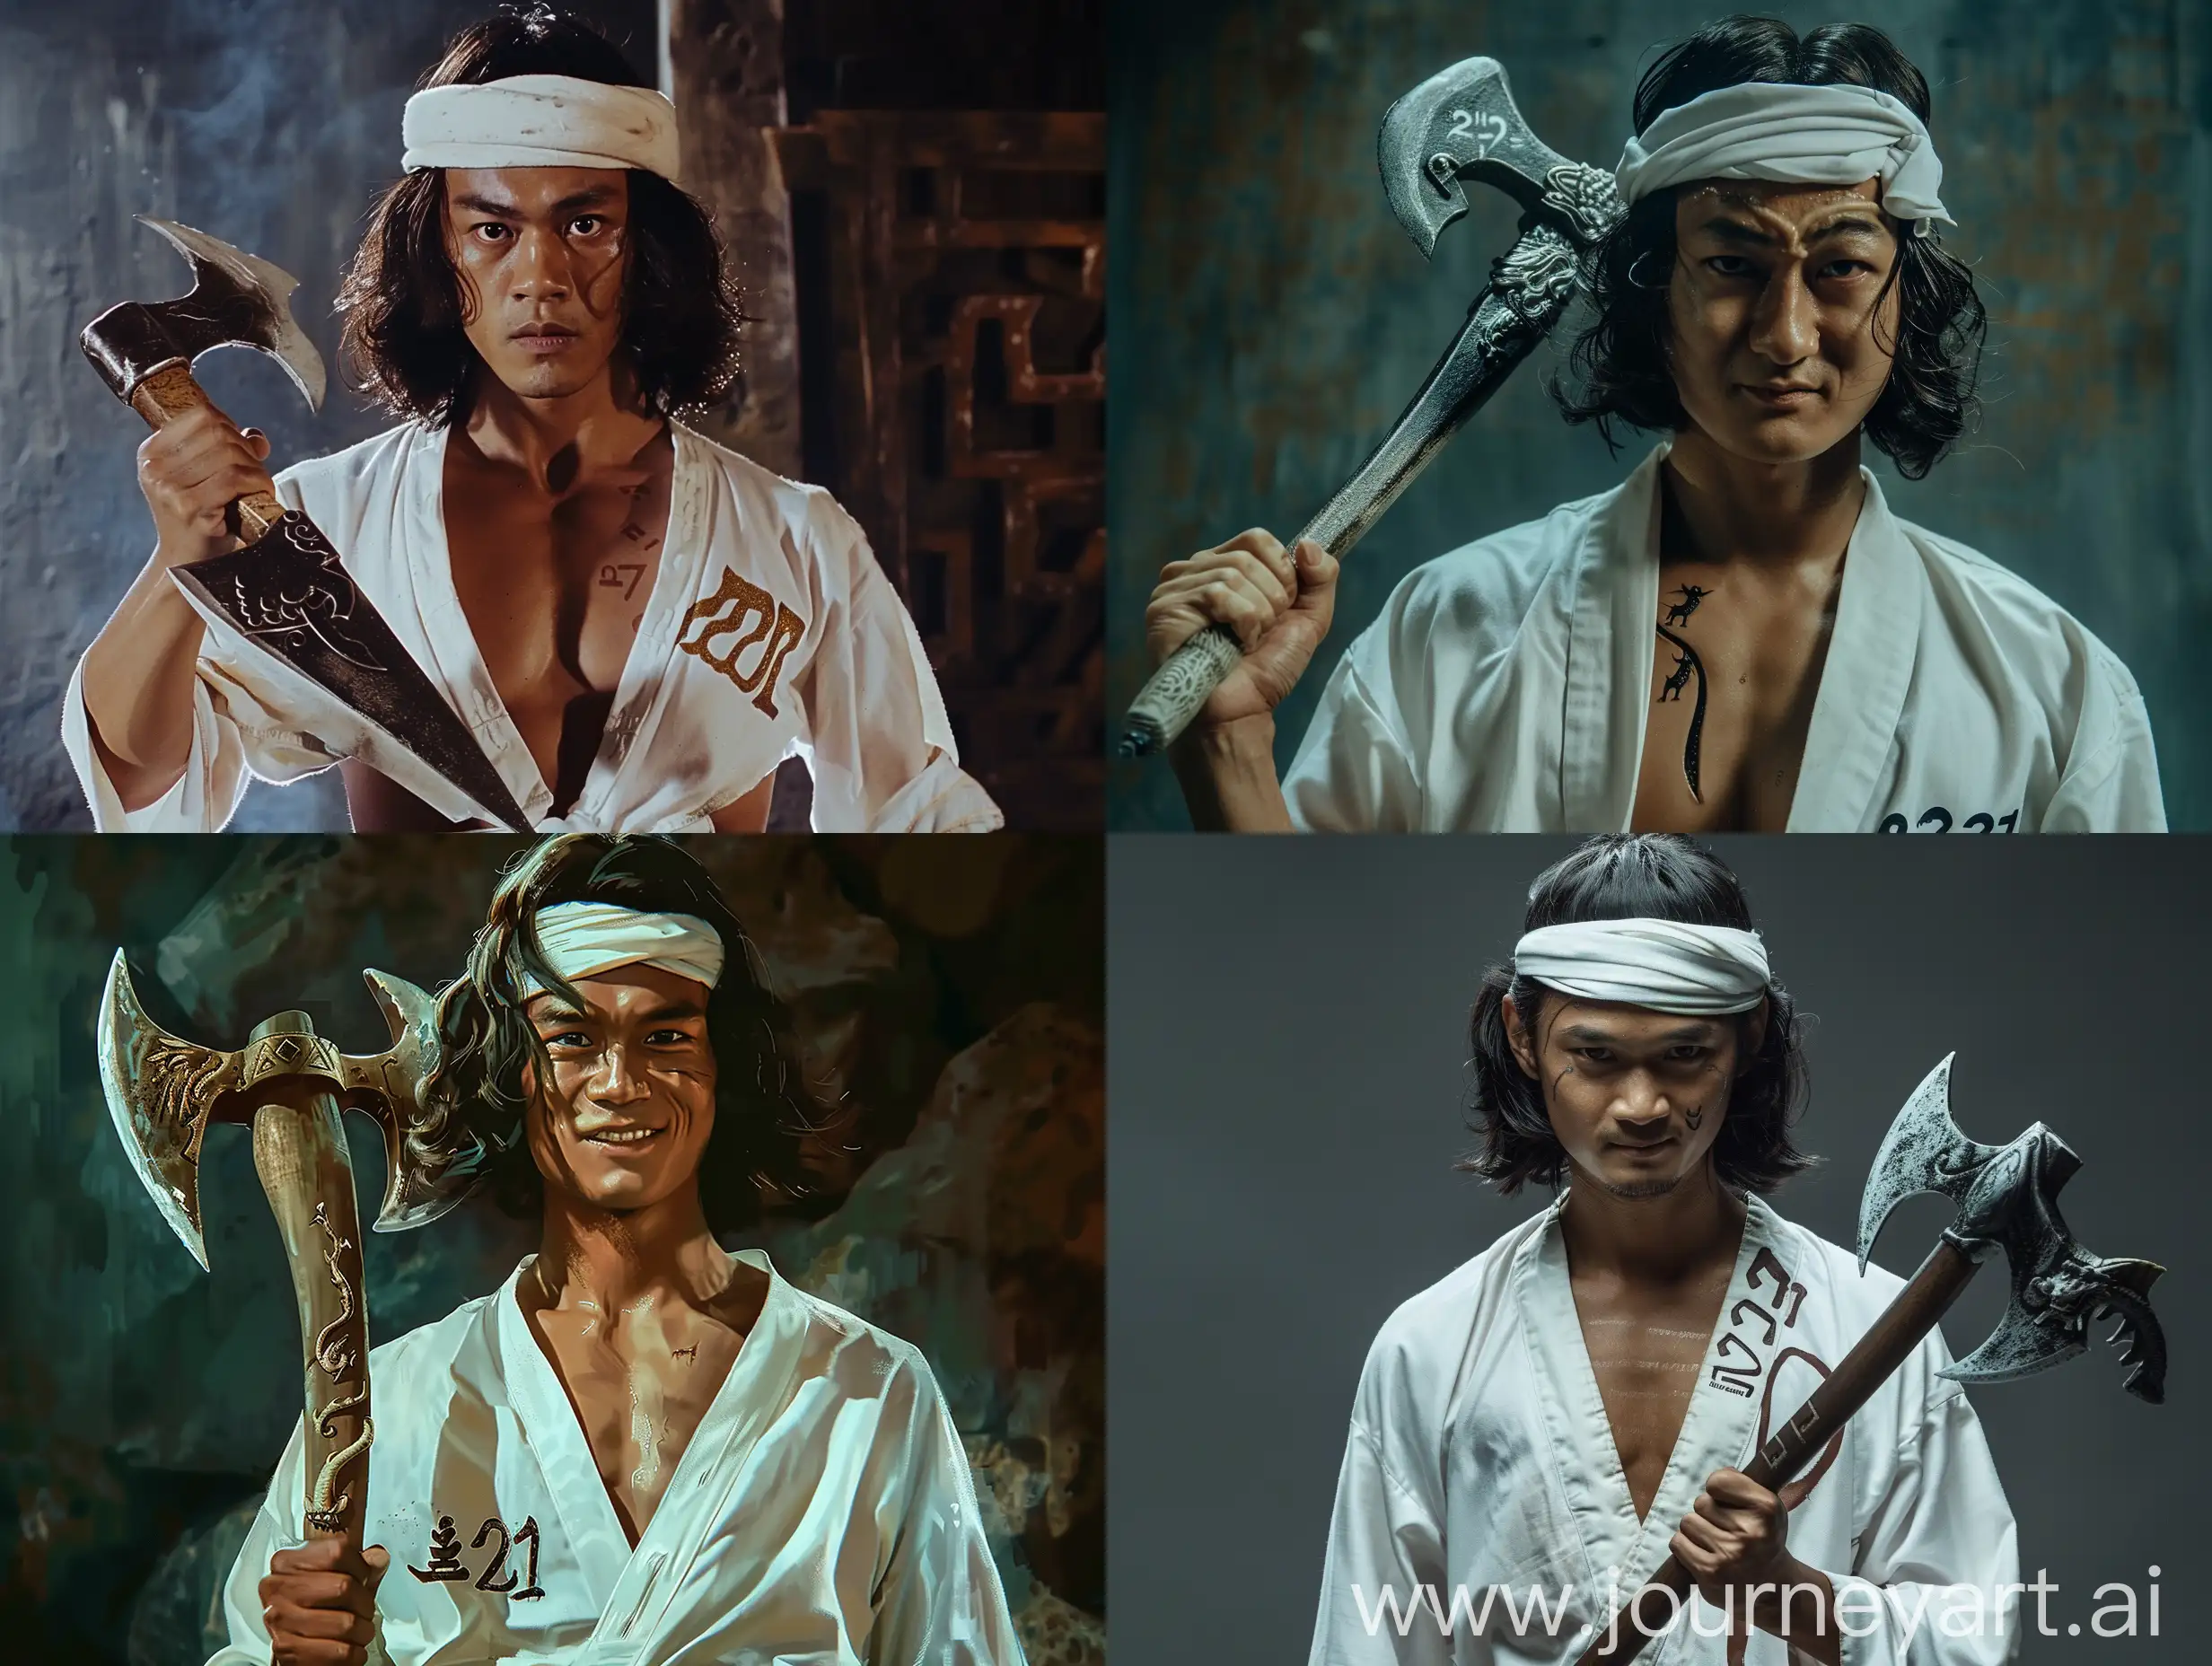 Humorous-Indonesian-Warrior-with-Dragon-Axe-in-Movie-Style-Portrait